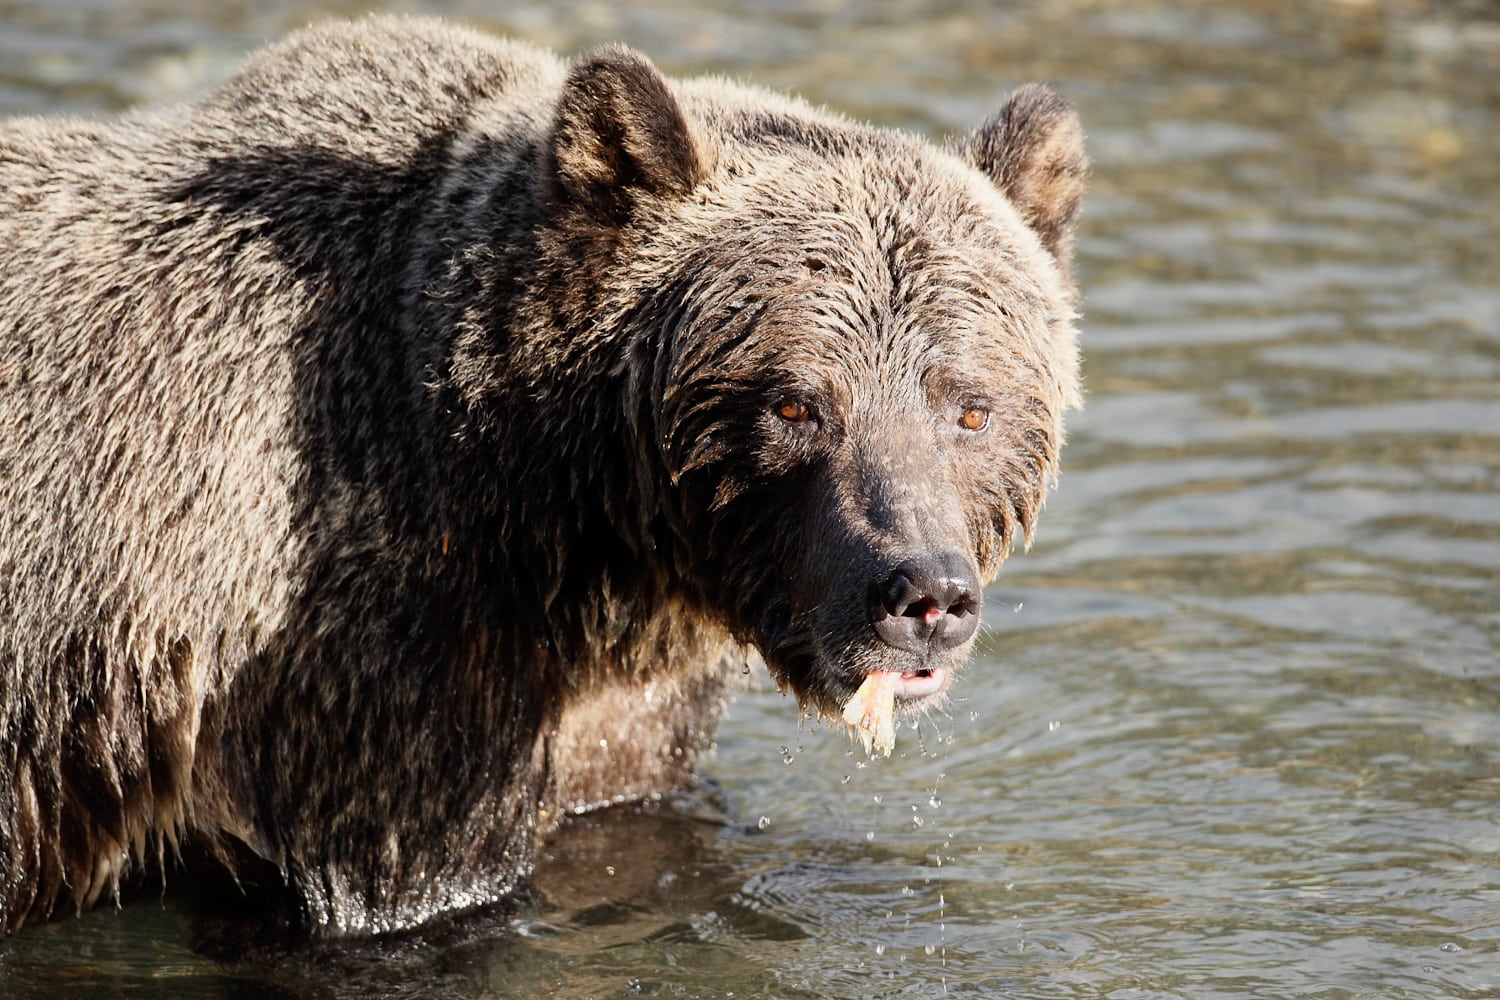 A grizzly eating fish at Wild Bear Lodge